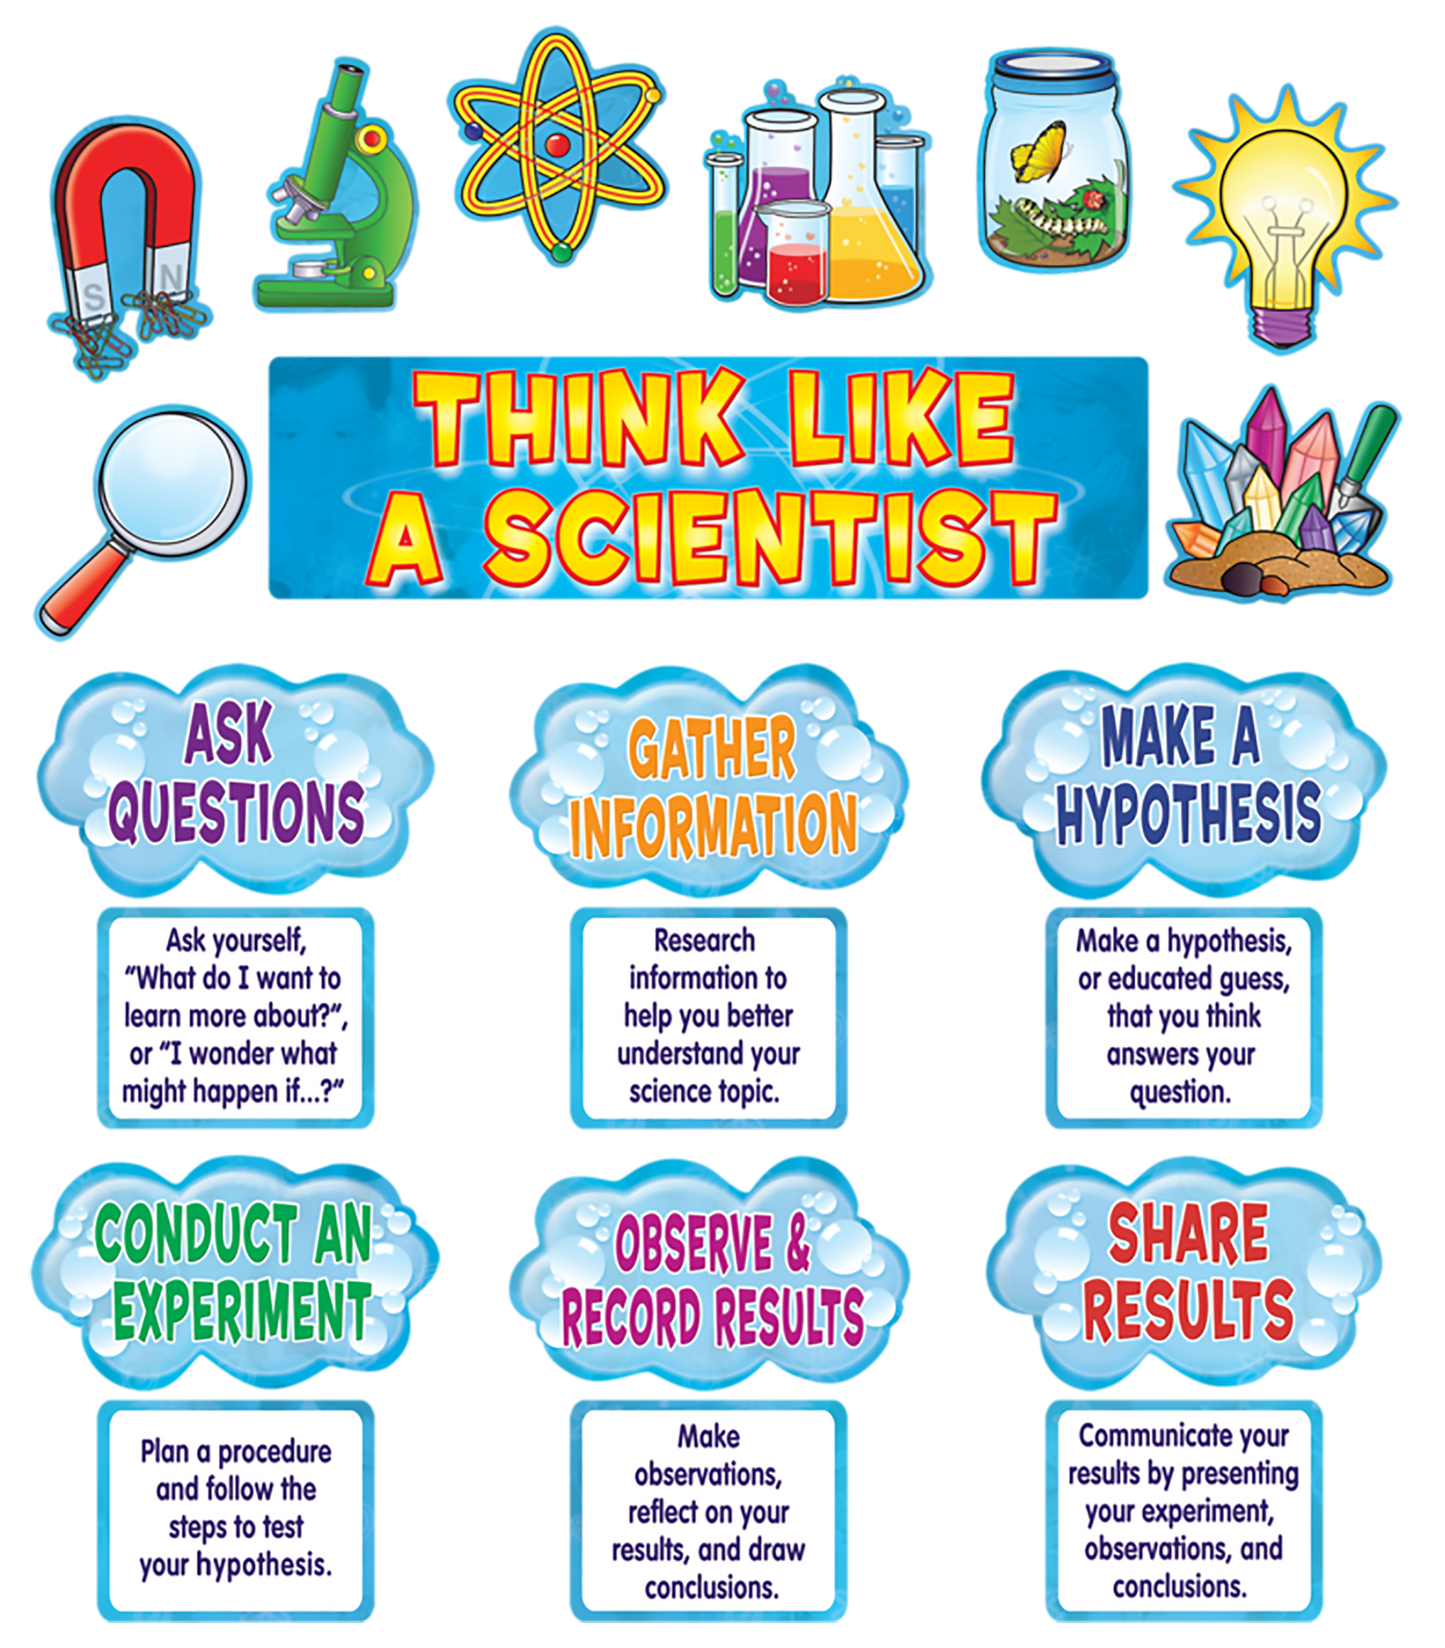 Science: Think like a scientist